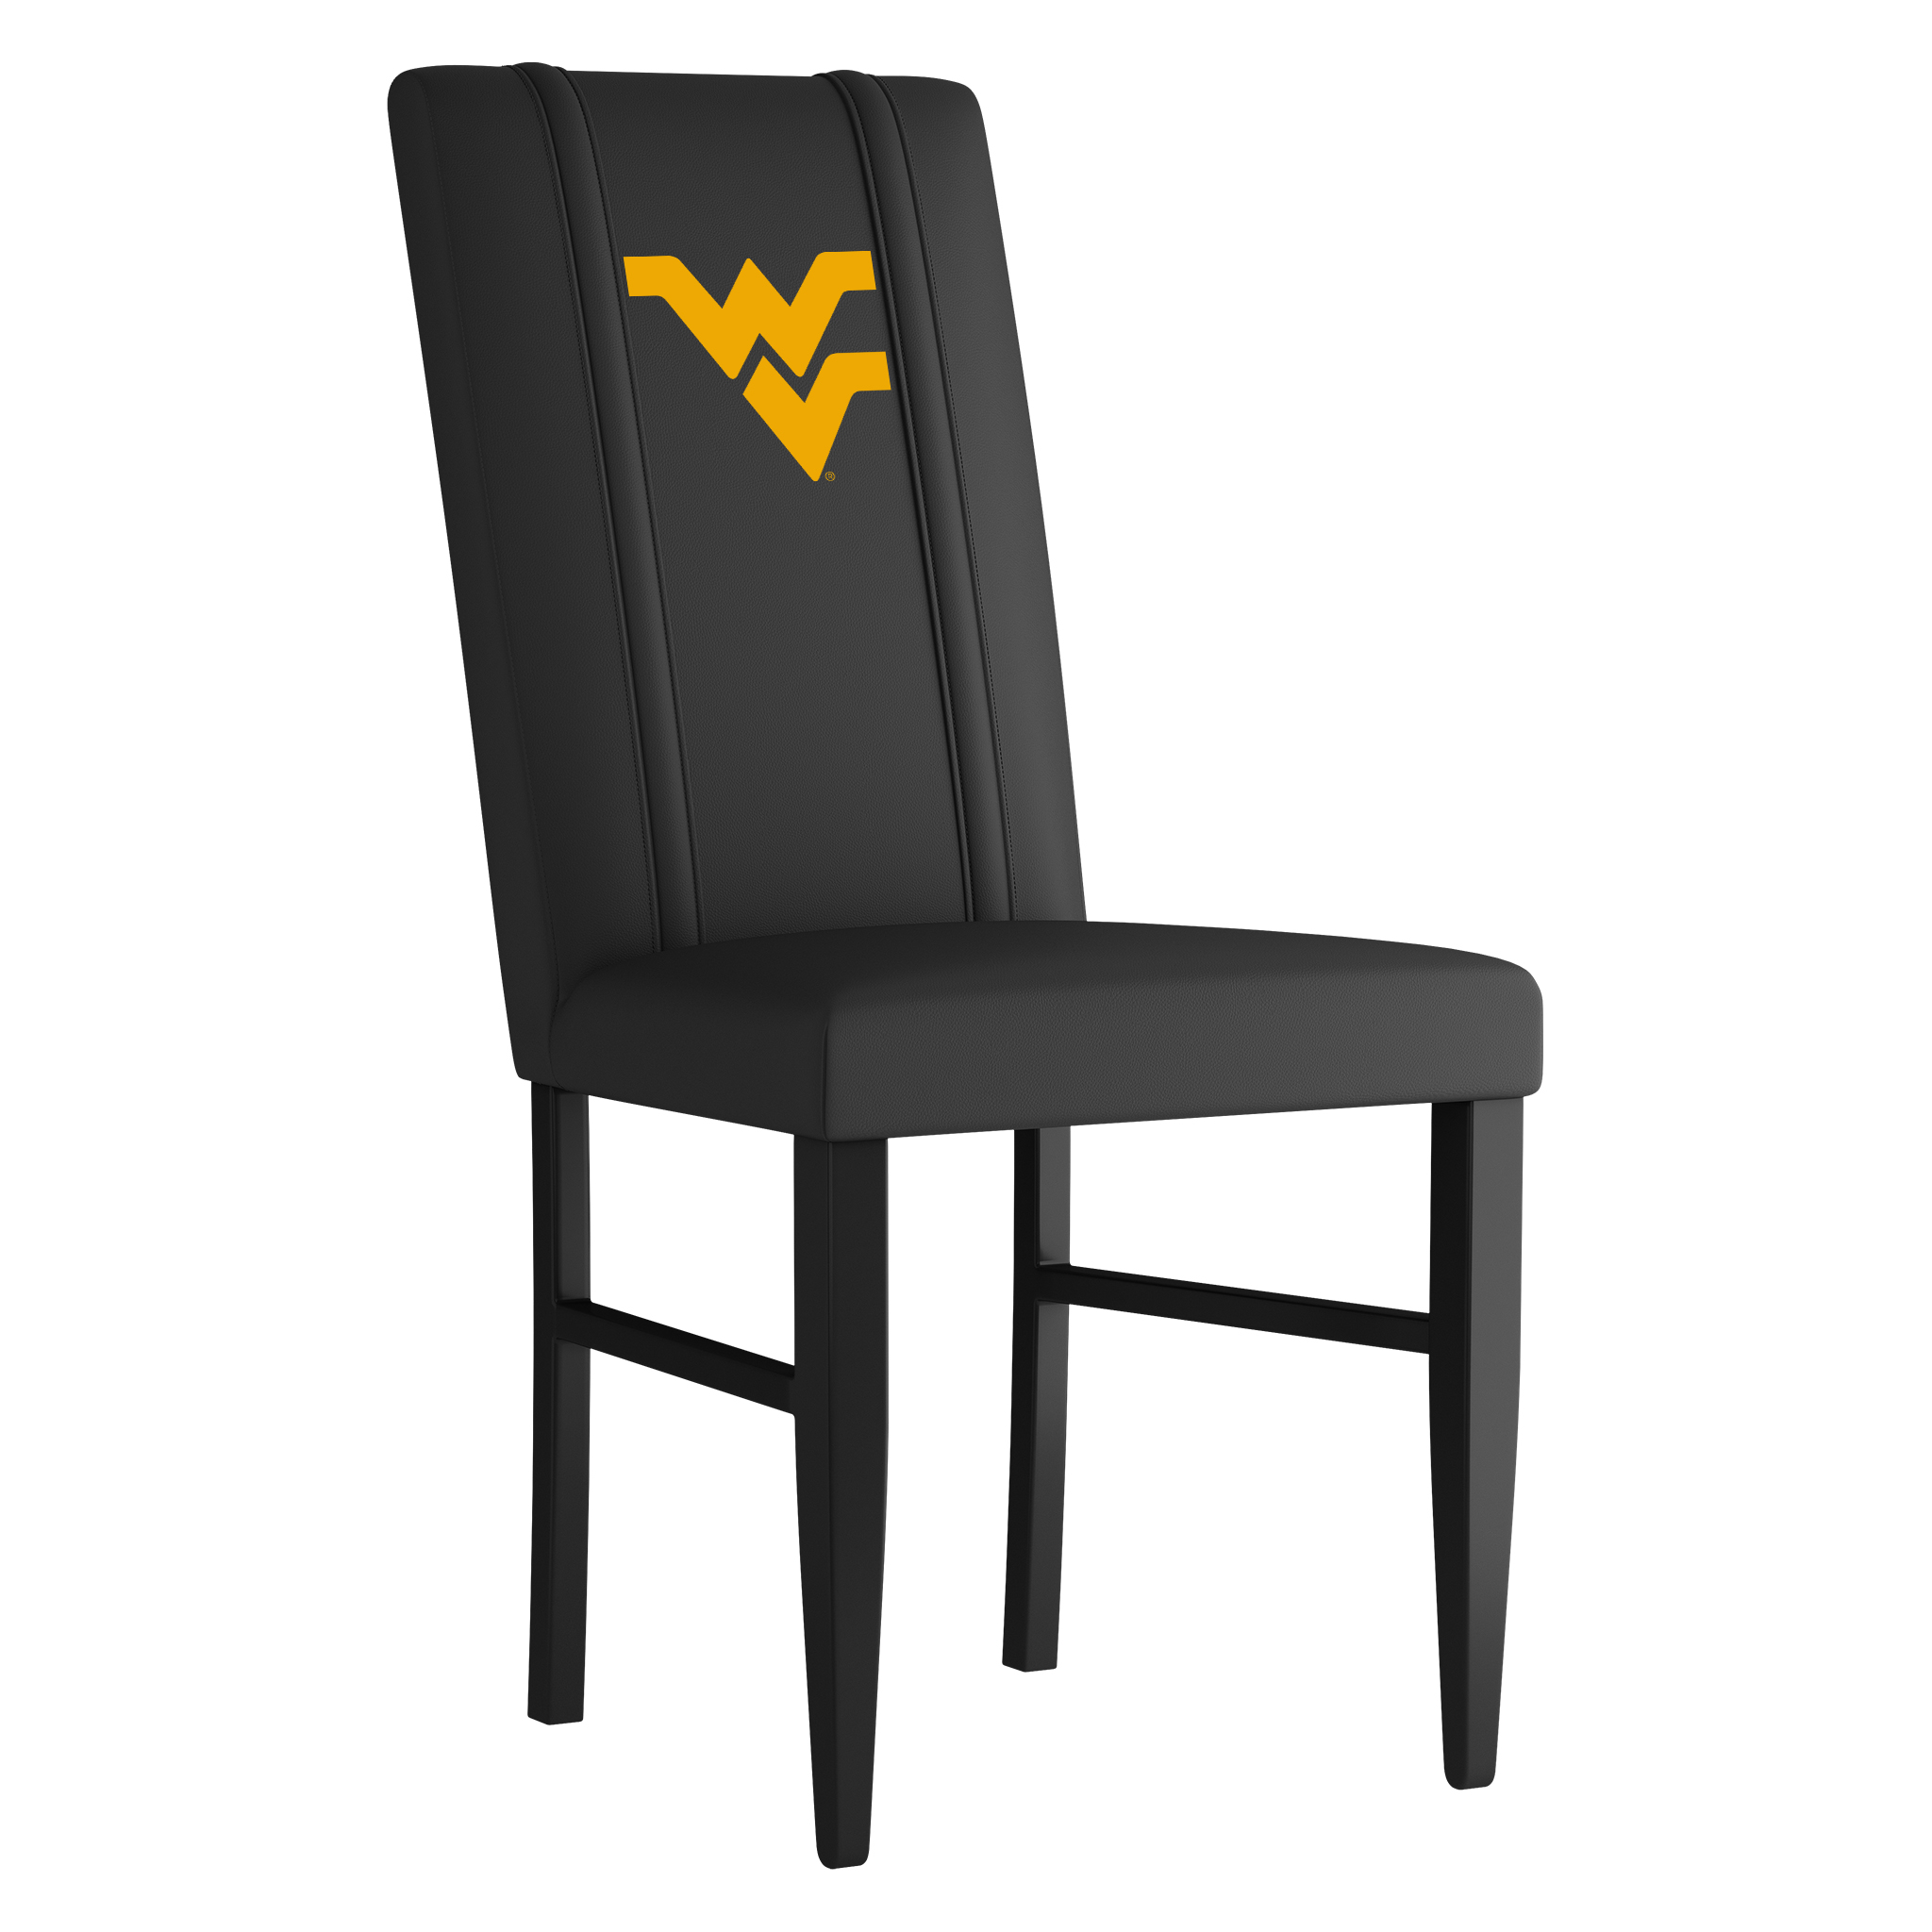 West Virginia Mountaineers Side Chair 2000 With West Virginia Mountaineers Logo